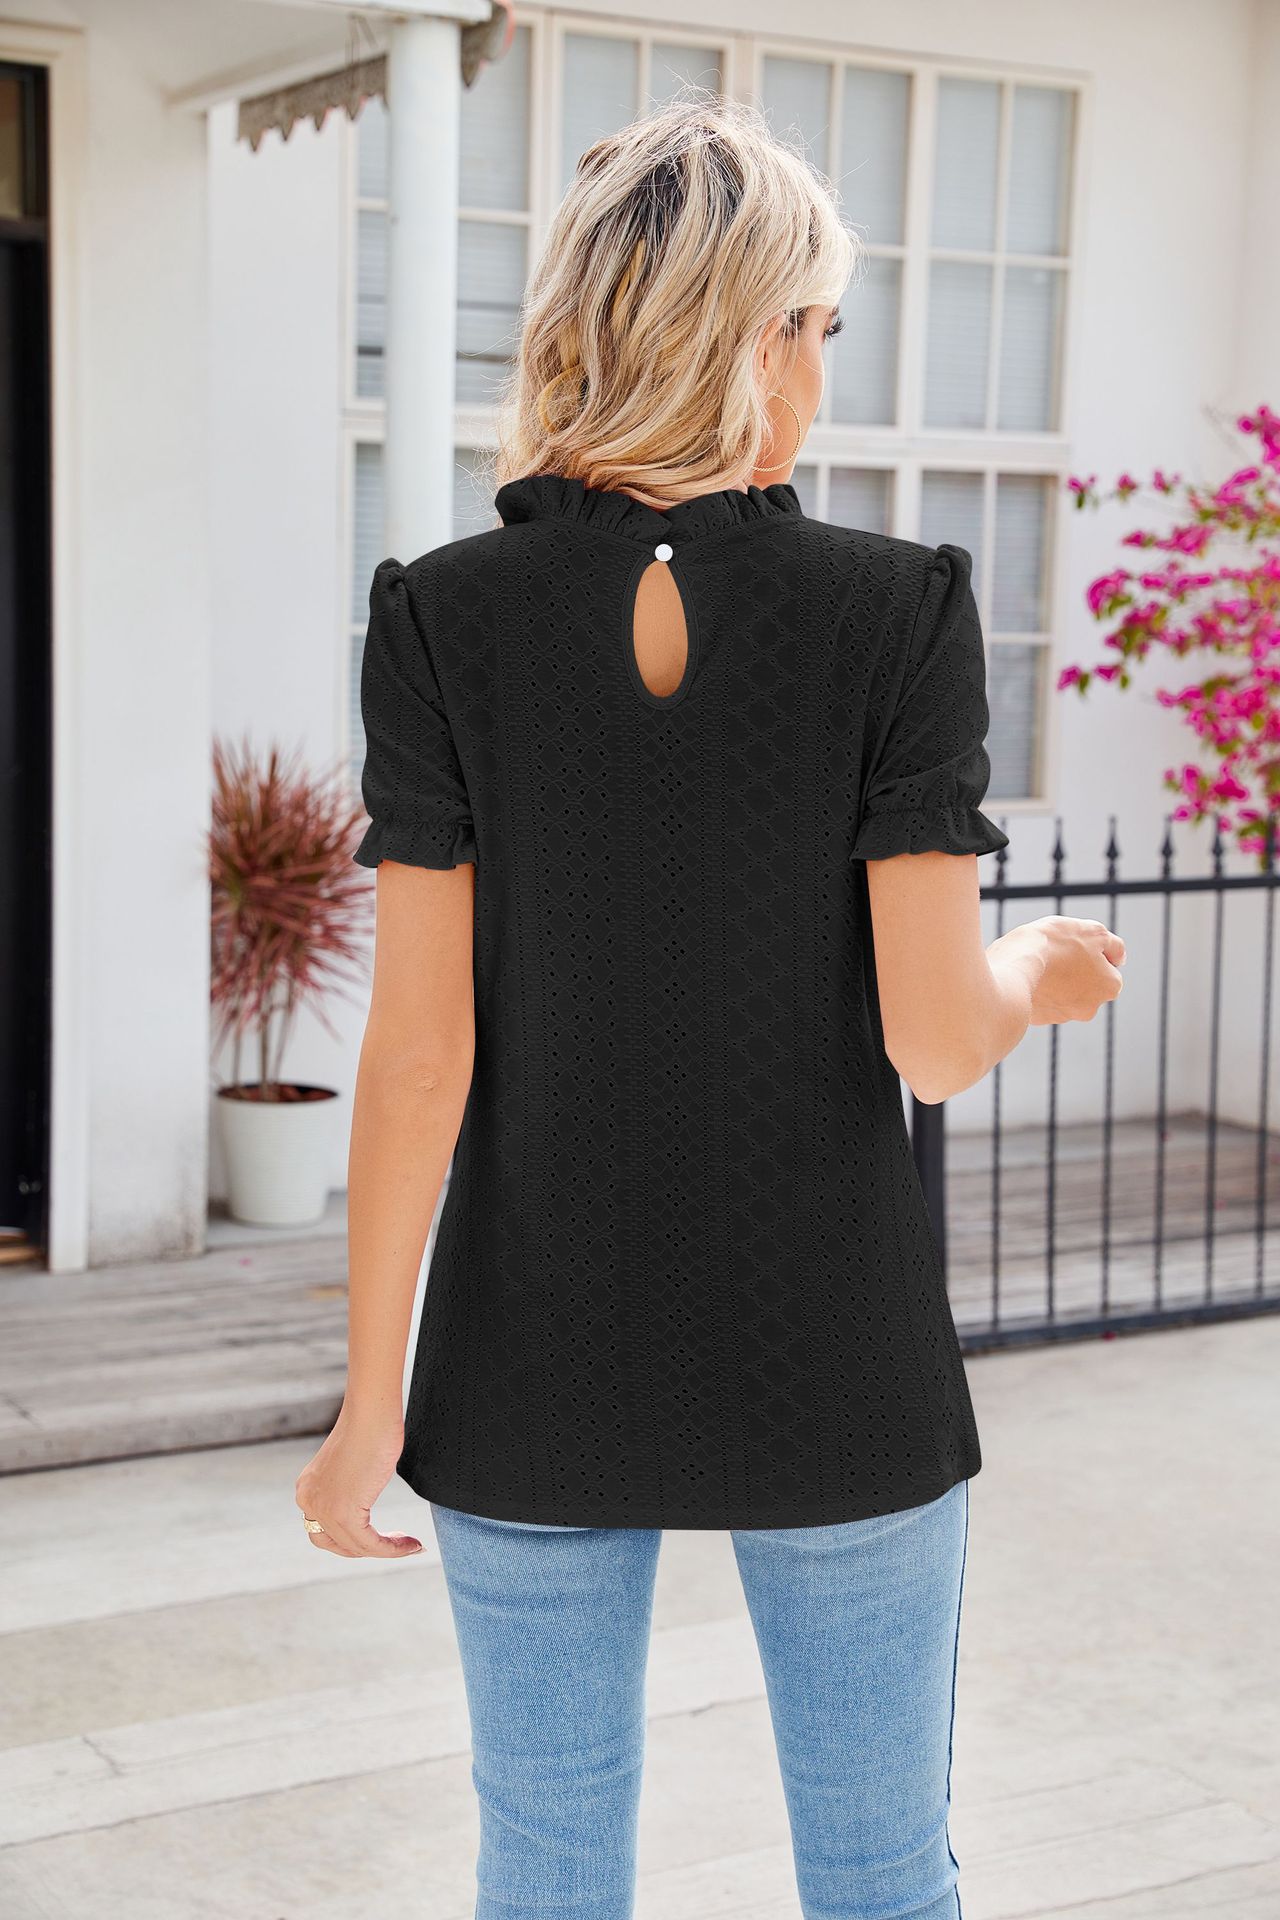 New Fashion Lacework Round Neck Top Summer Puff Sleeves Hollow Design Loose Pleated T-shirt For Womens Clothing